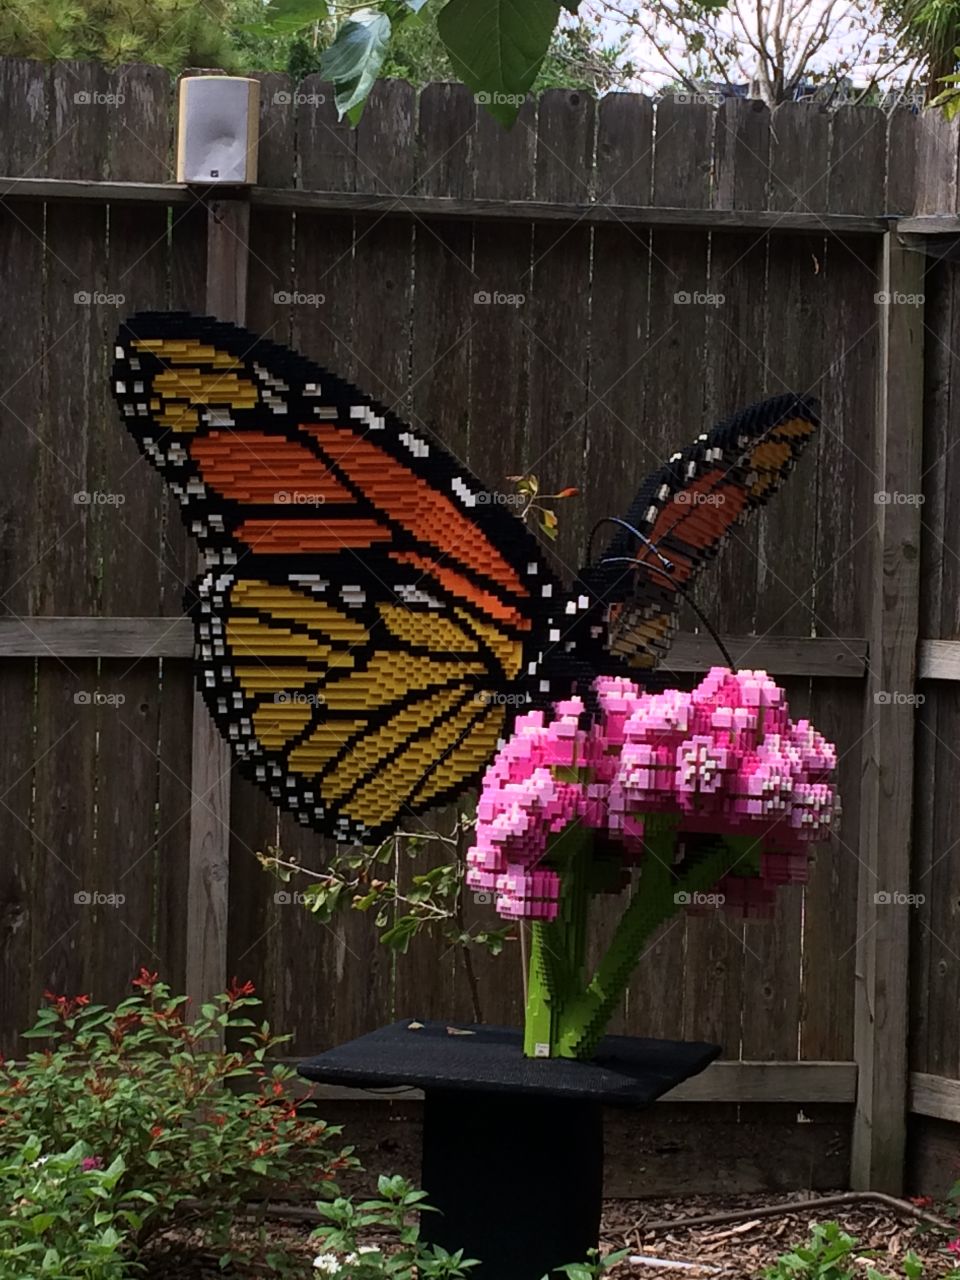 LEGO butterfly at Houston zoo